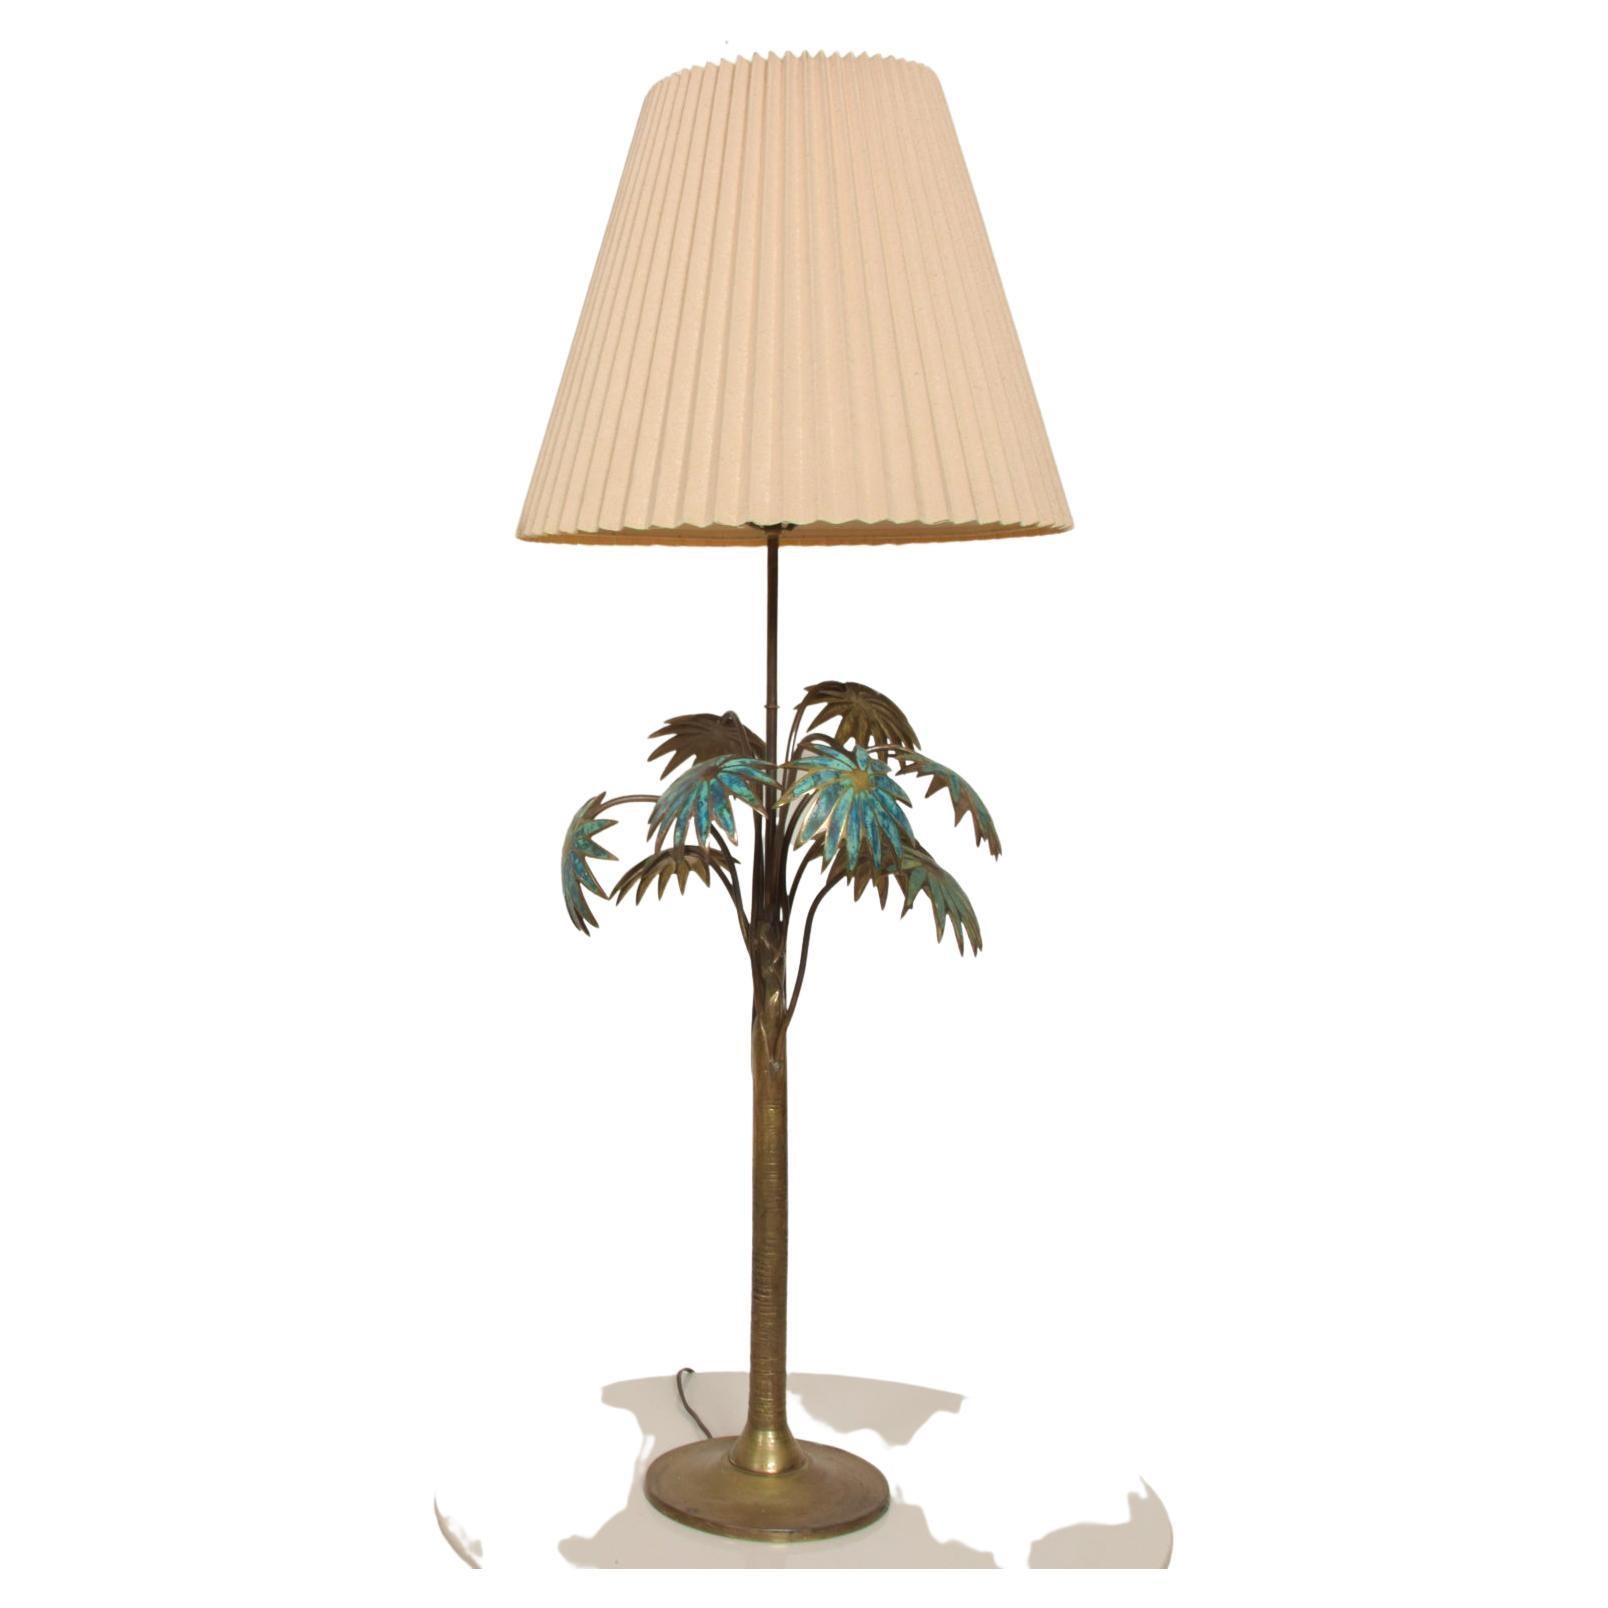 Exquisite Pepe Mendoza Palm Tree Tall Table Lamp
Made in MEXICO circa 1950s
Bronze and malachite.
Unmarked.
33.5 H (base of socket), 16 in diameter (overall), base 8 in diameter
Original Unrestored Vintage Preowned Condition. New socket.
Refer to